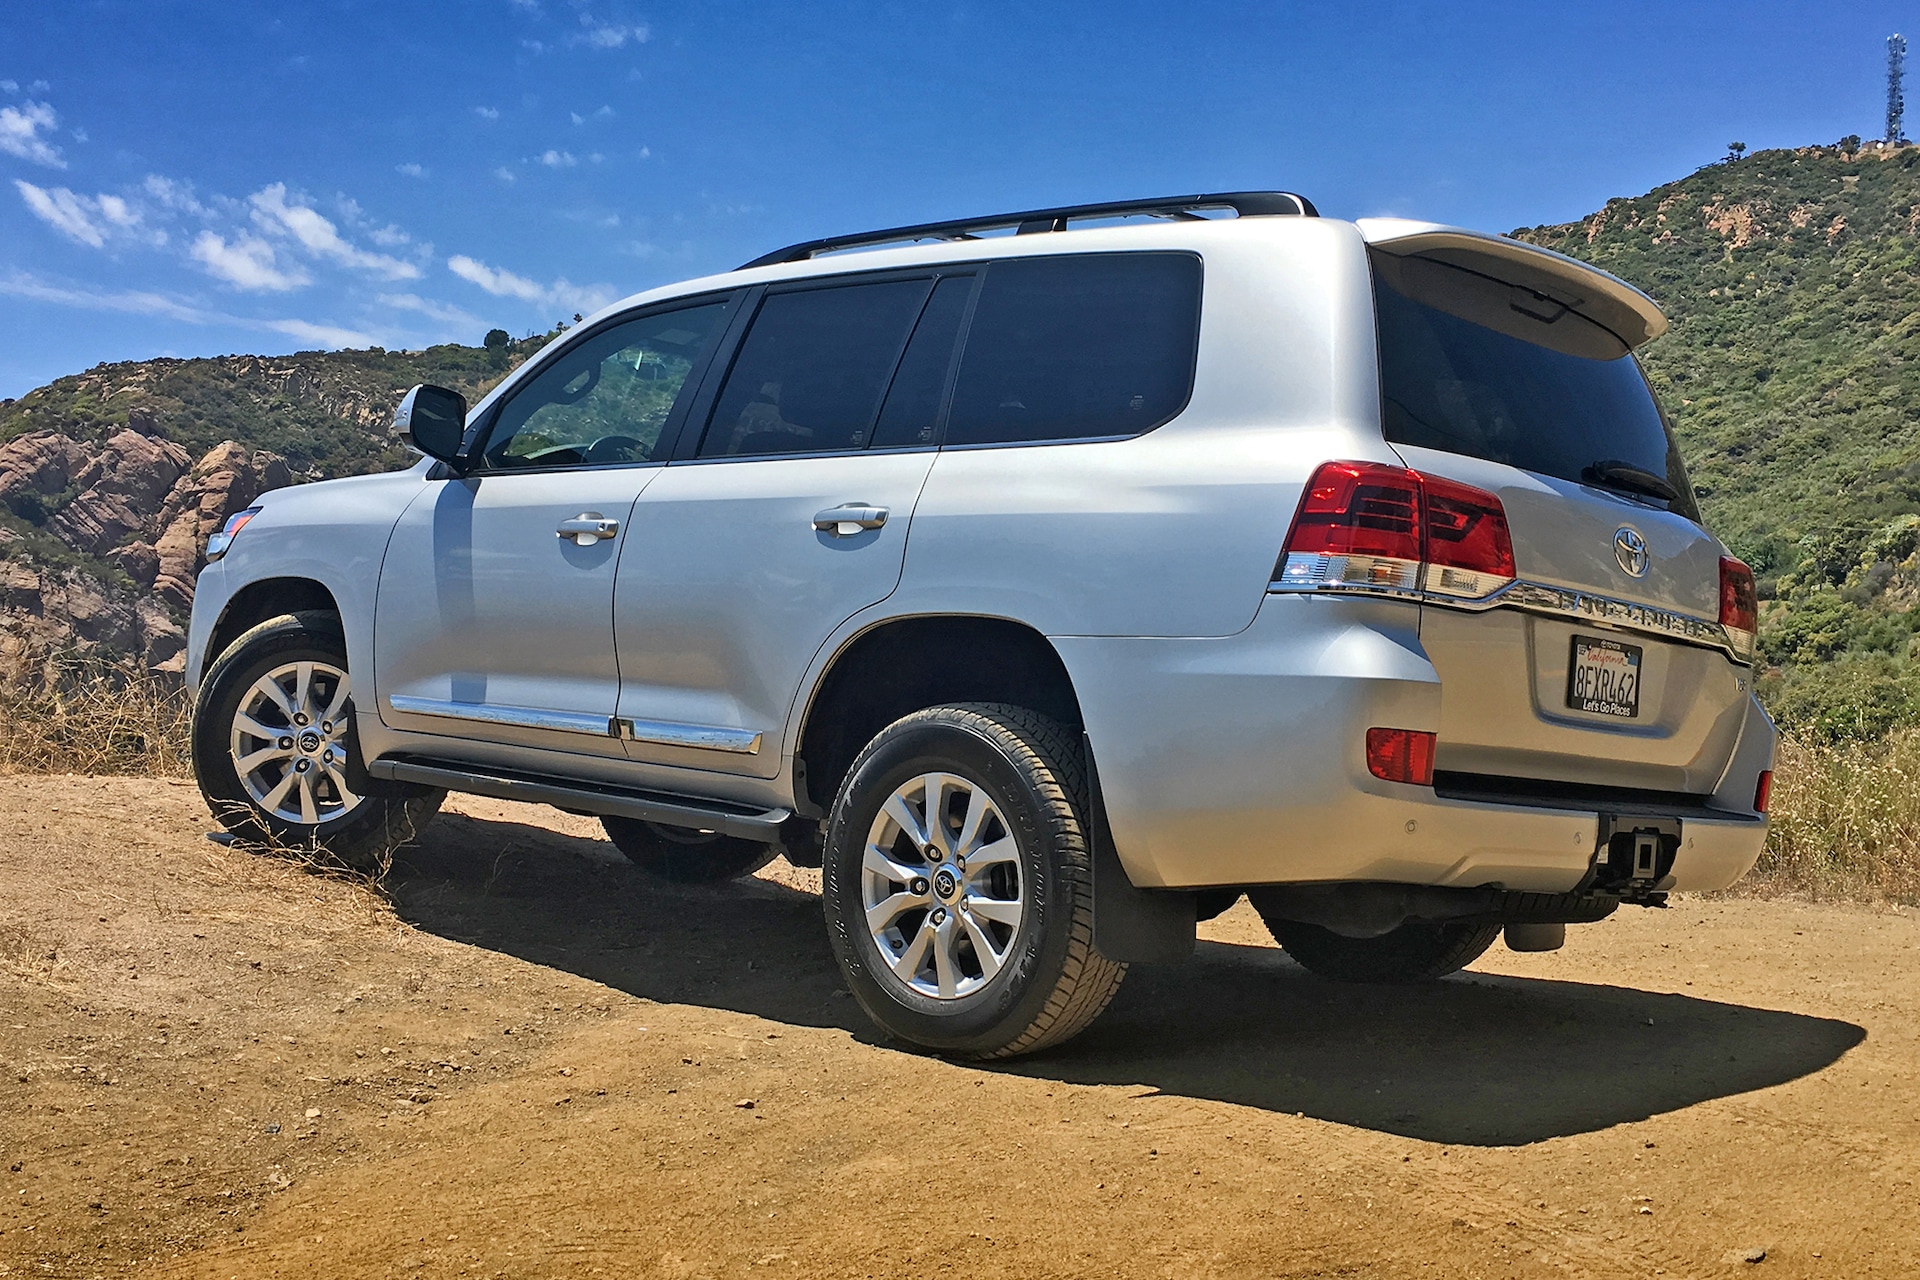 The Toyota Land Cruiser Is a Big Brute with Plenty of Swagger